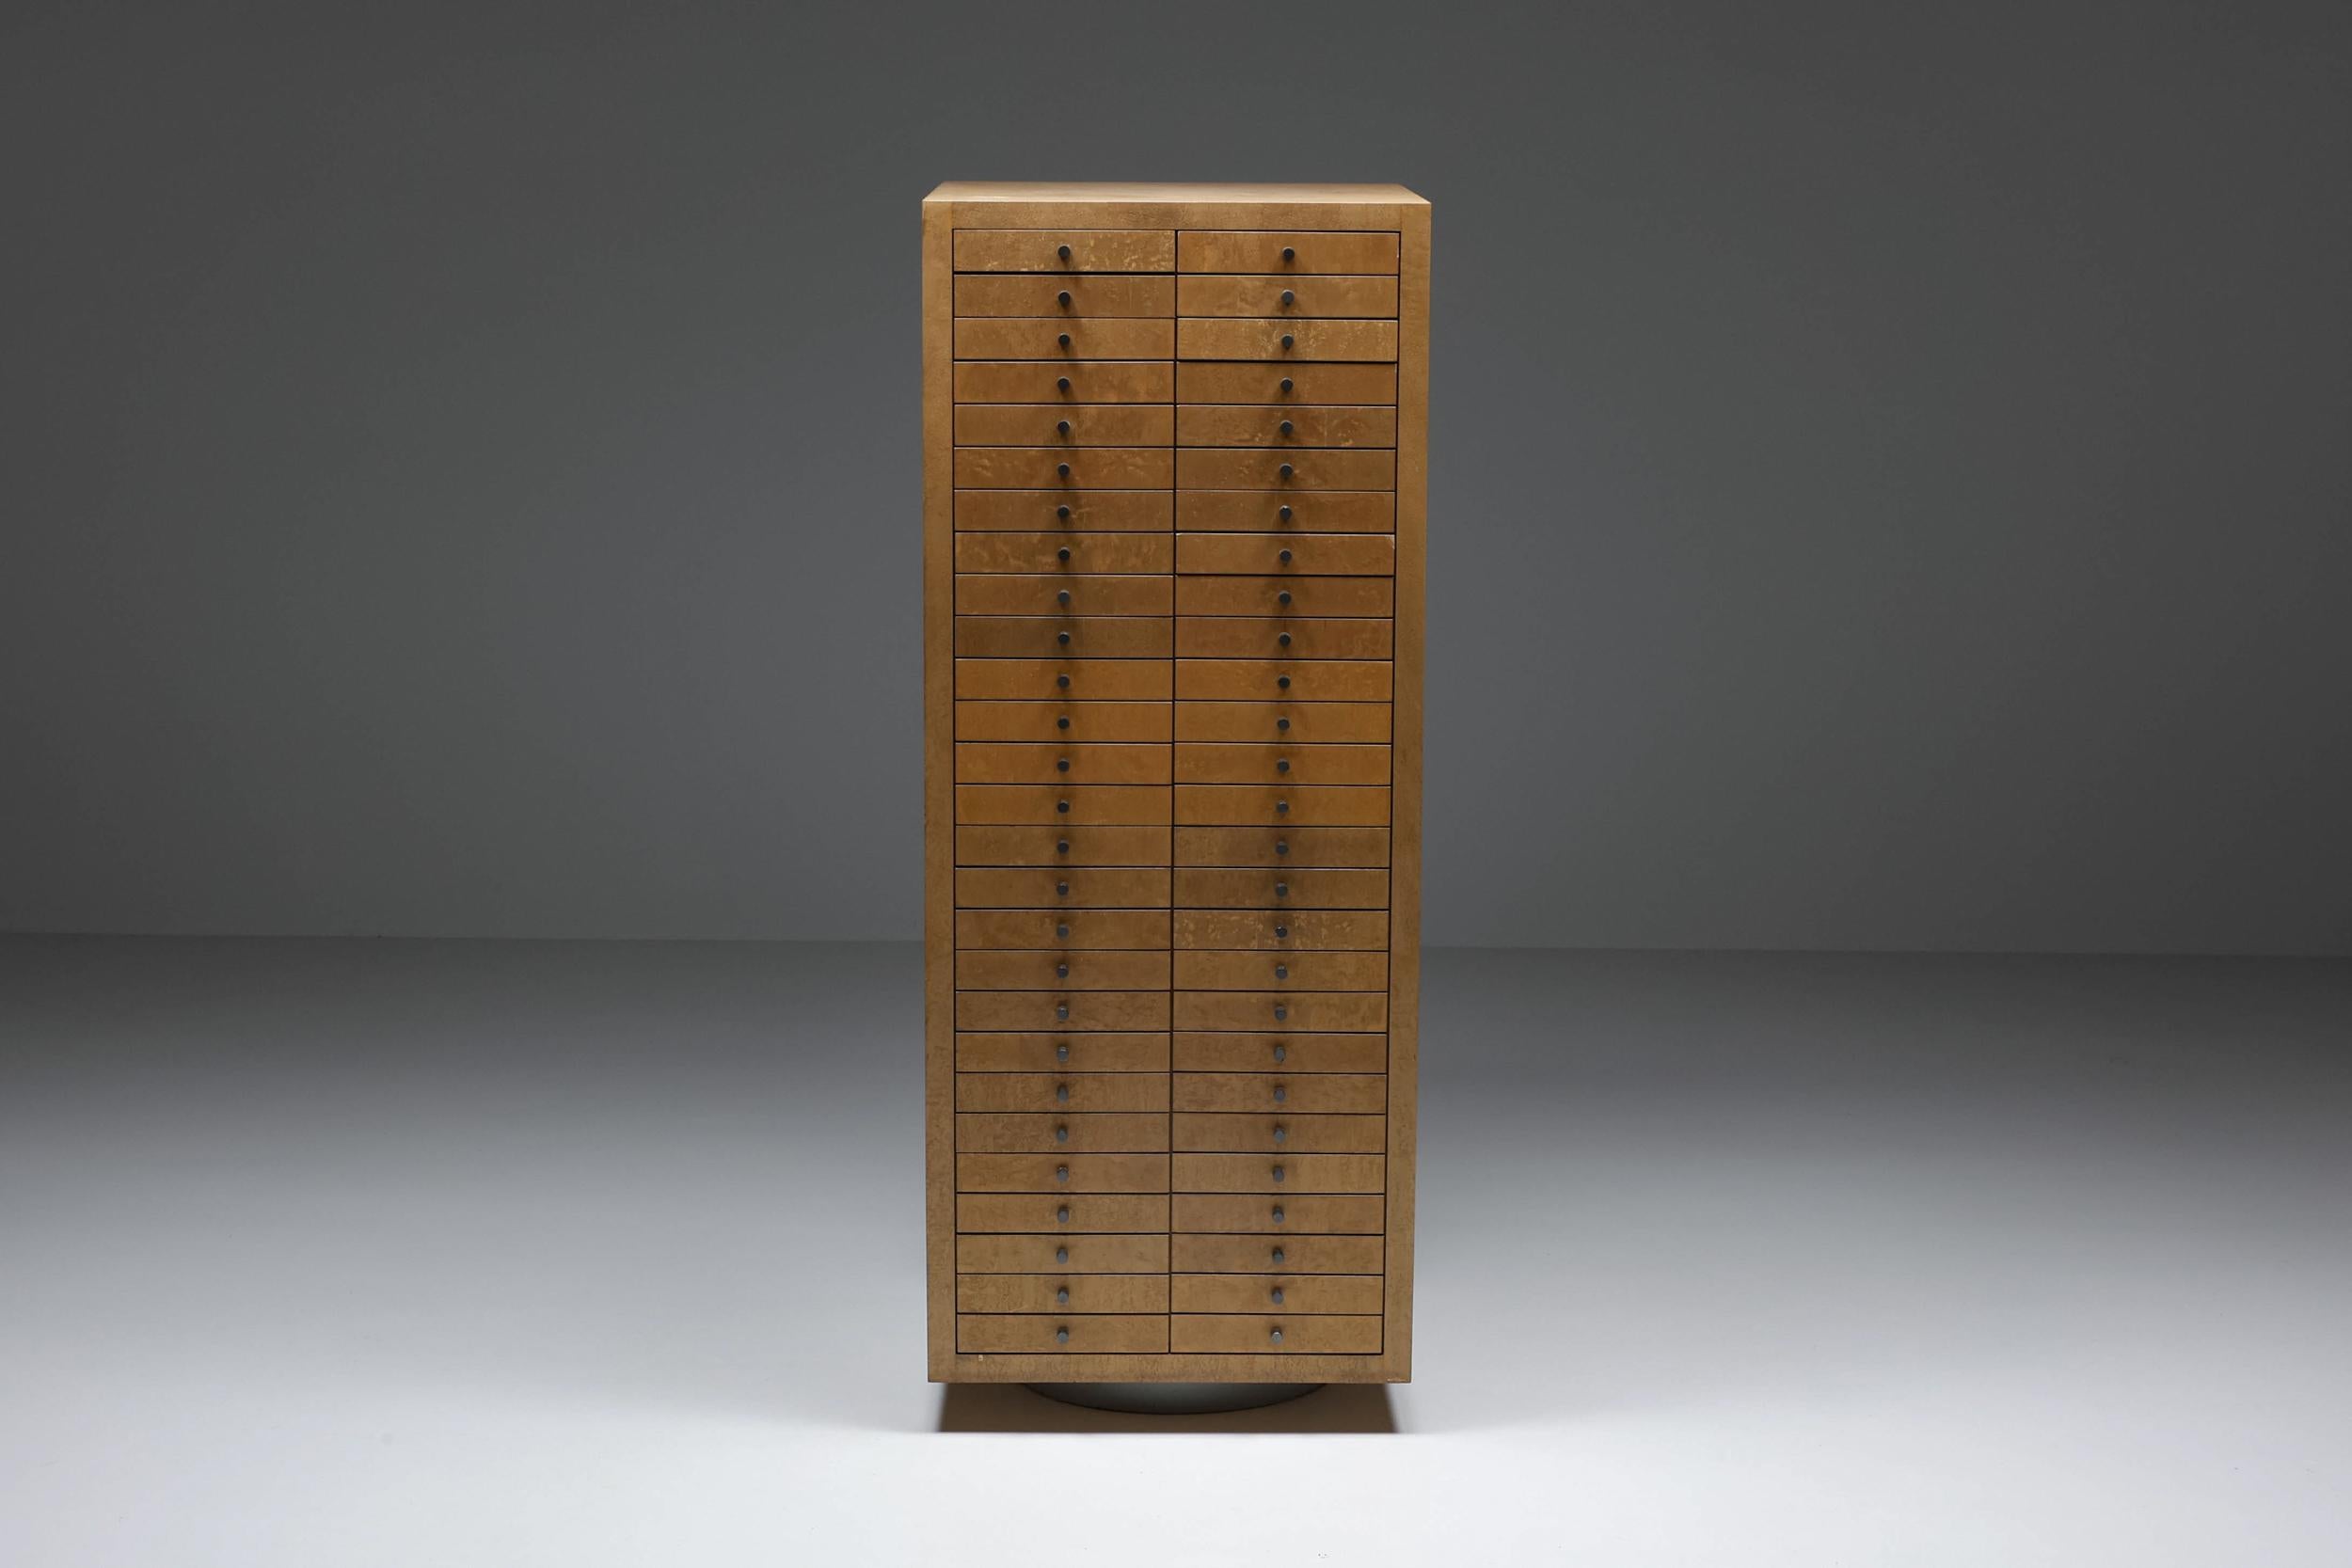 Birdseye maple; multi-tech xl high board with drawers; metal multi-drawer cabinet, Frans Van Praet; 1980s;

Memphis style multi-drawer cabinet with 54 drawers by Frans Van Praet. Birdseye maple veneer with anodized hammered metal handles and an